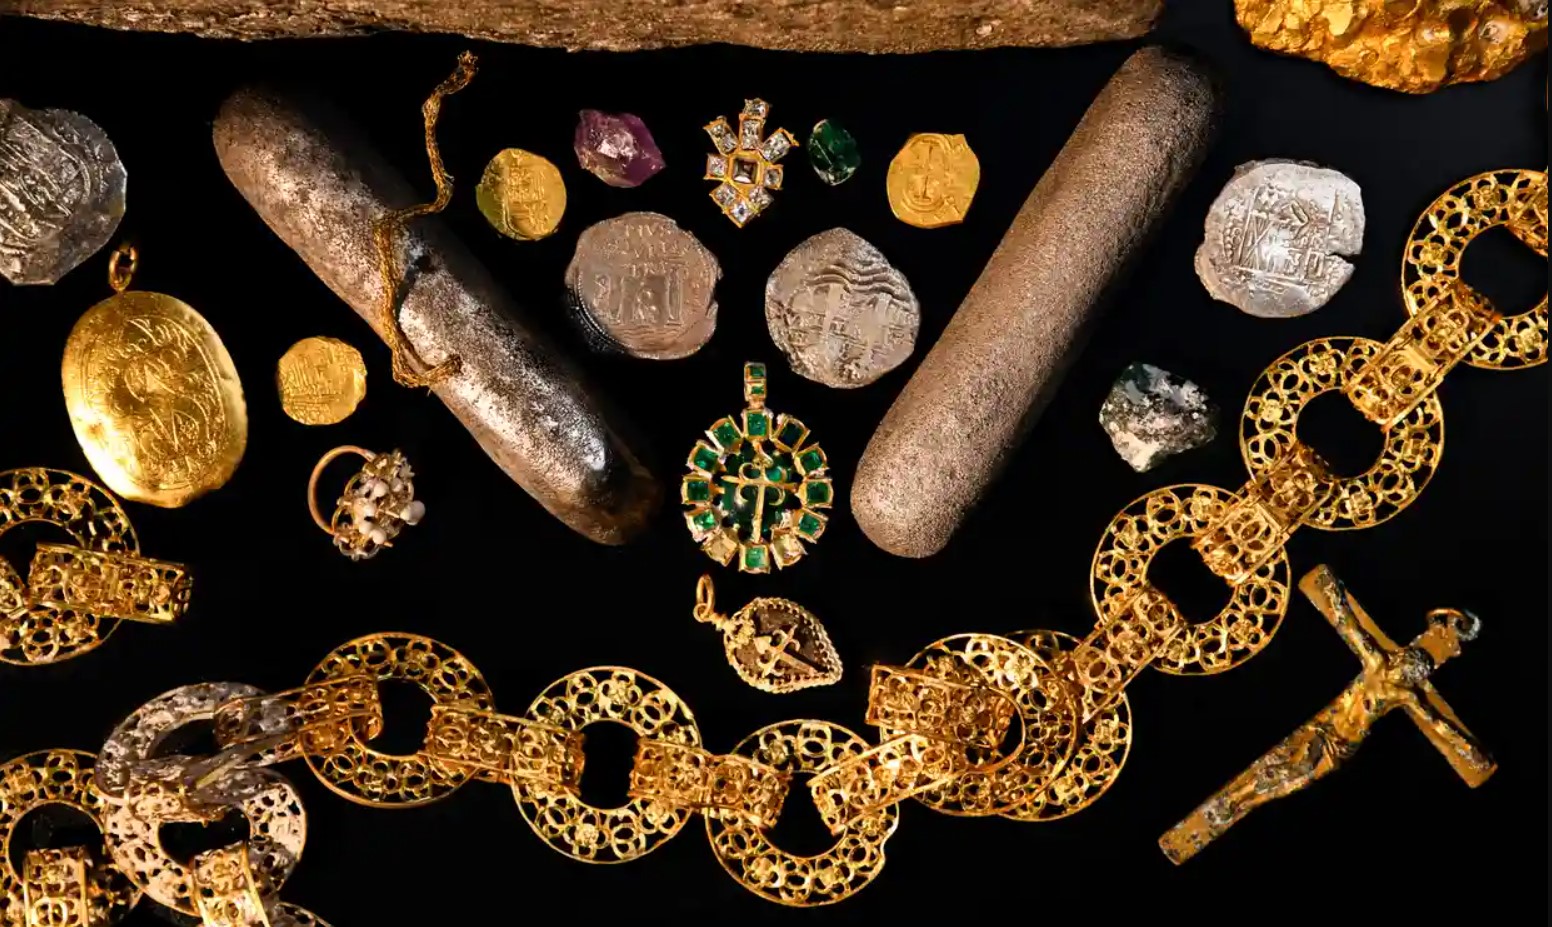 New treasures of the Spanish galleon 366 years after the sinking